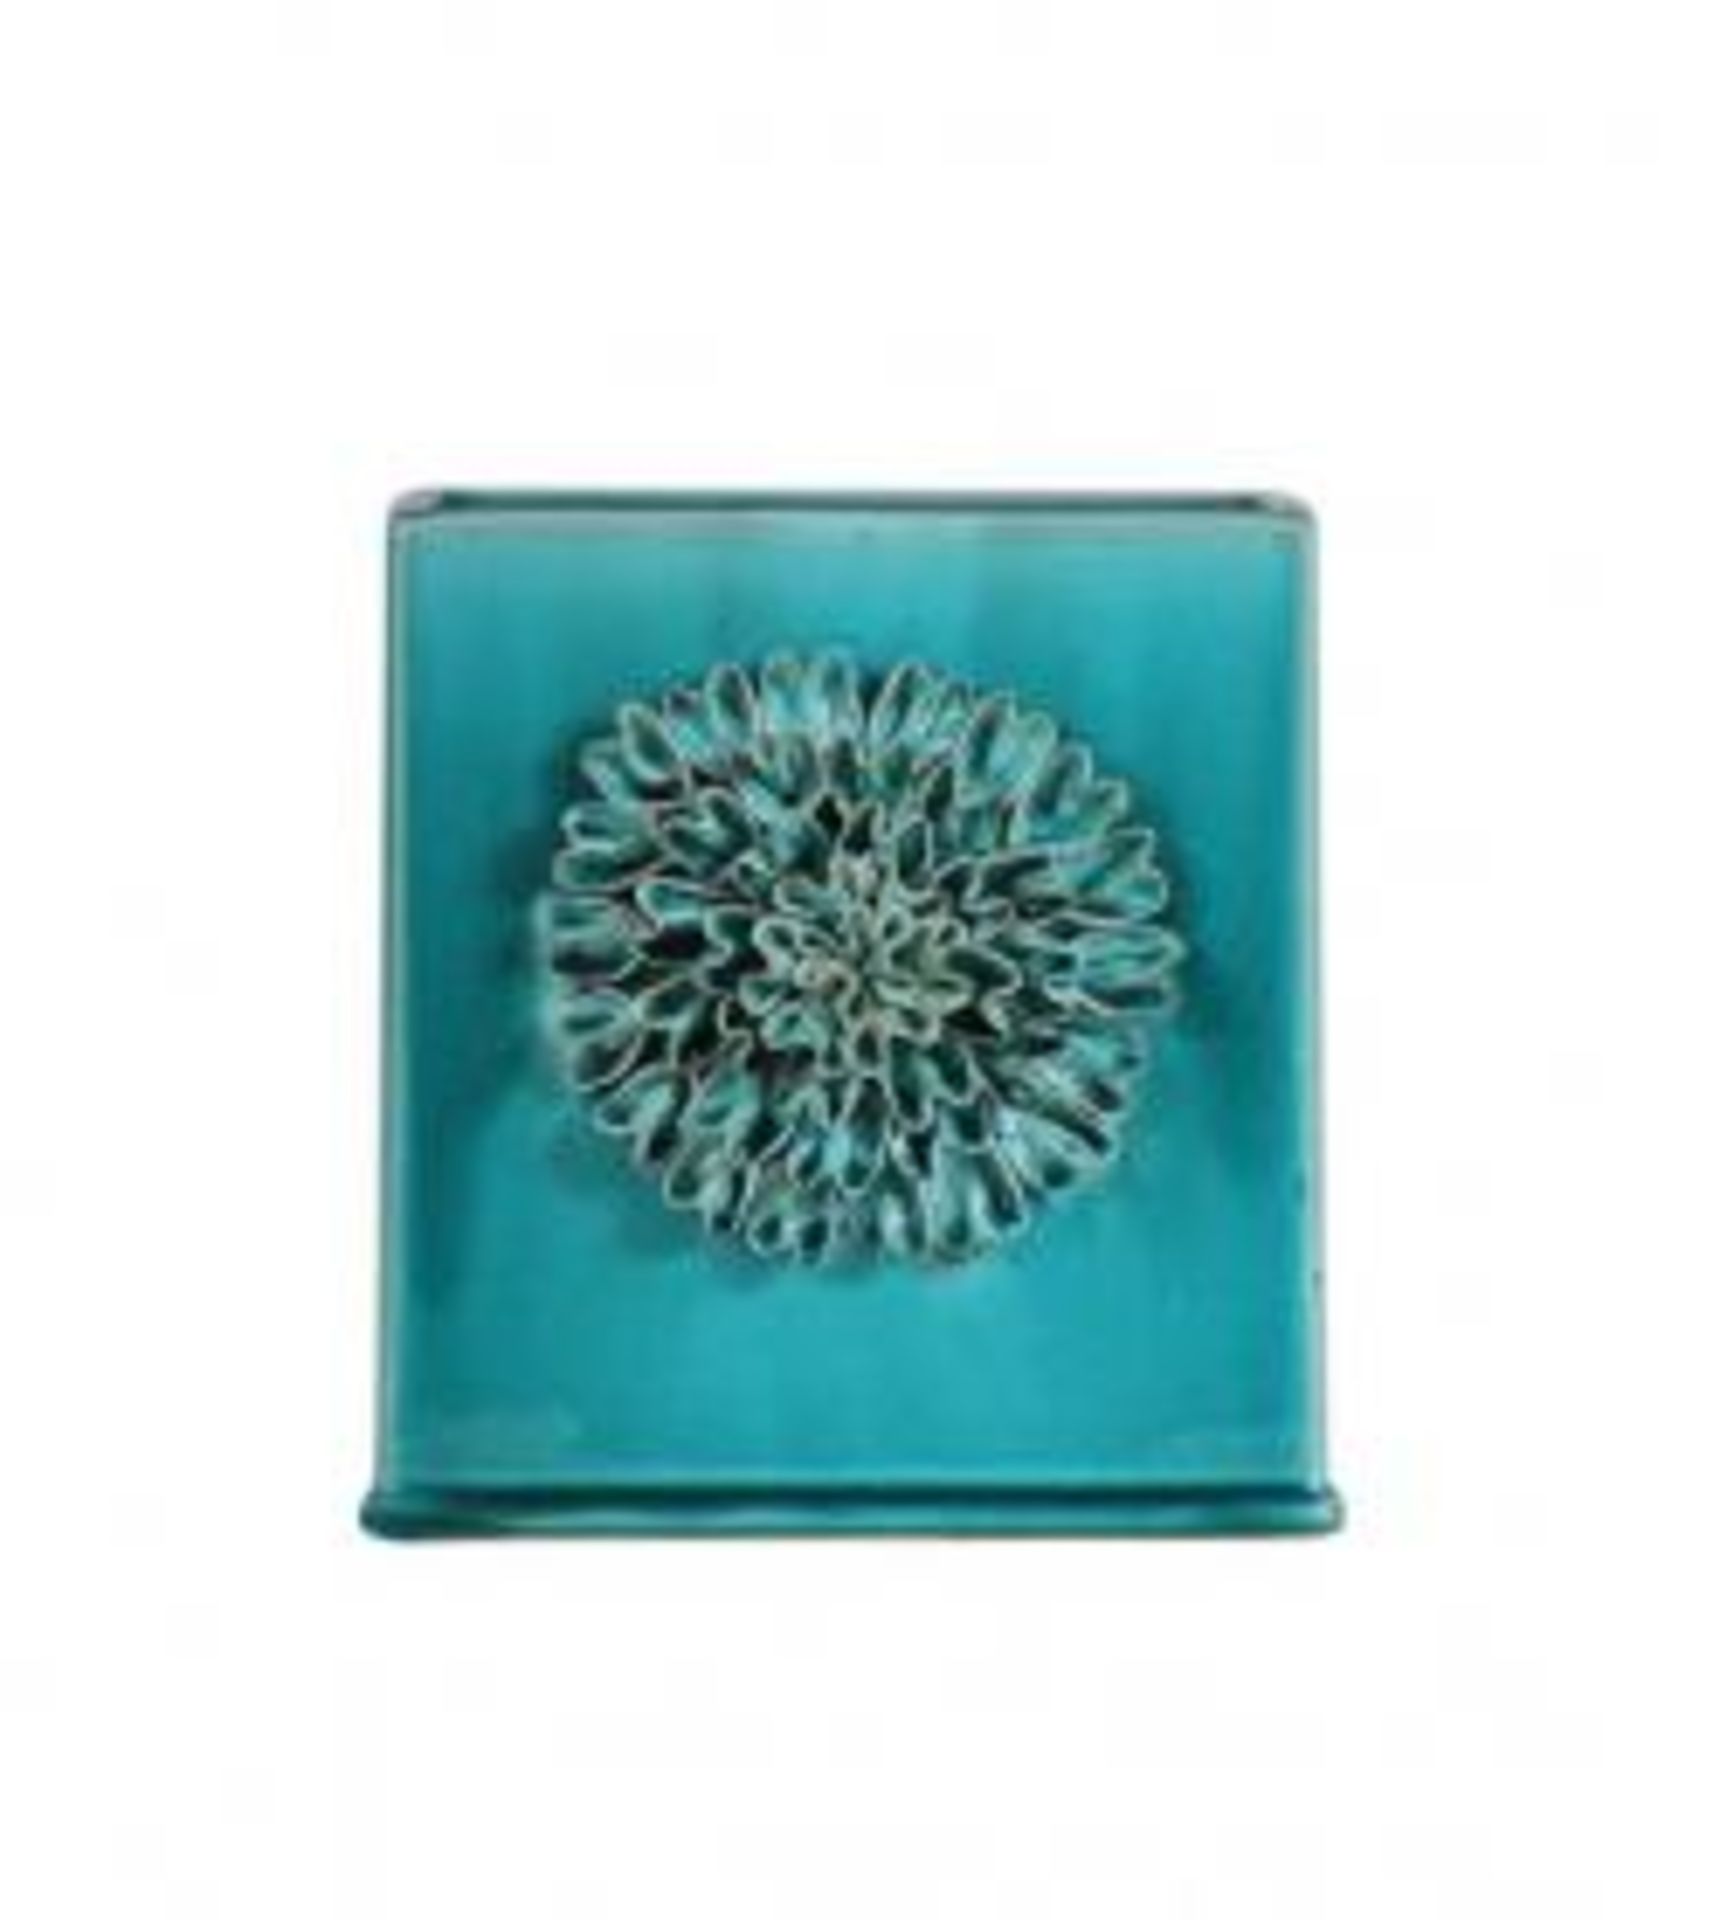 Brand New Boxed High Quality Turquoise China  Small Vase Size 18 X 19 X 7 Cm